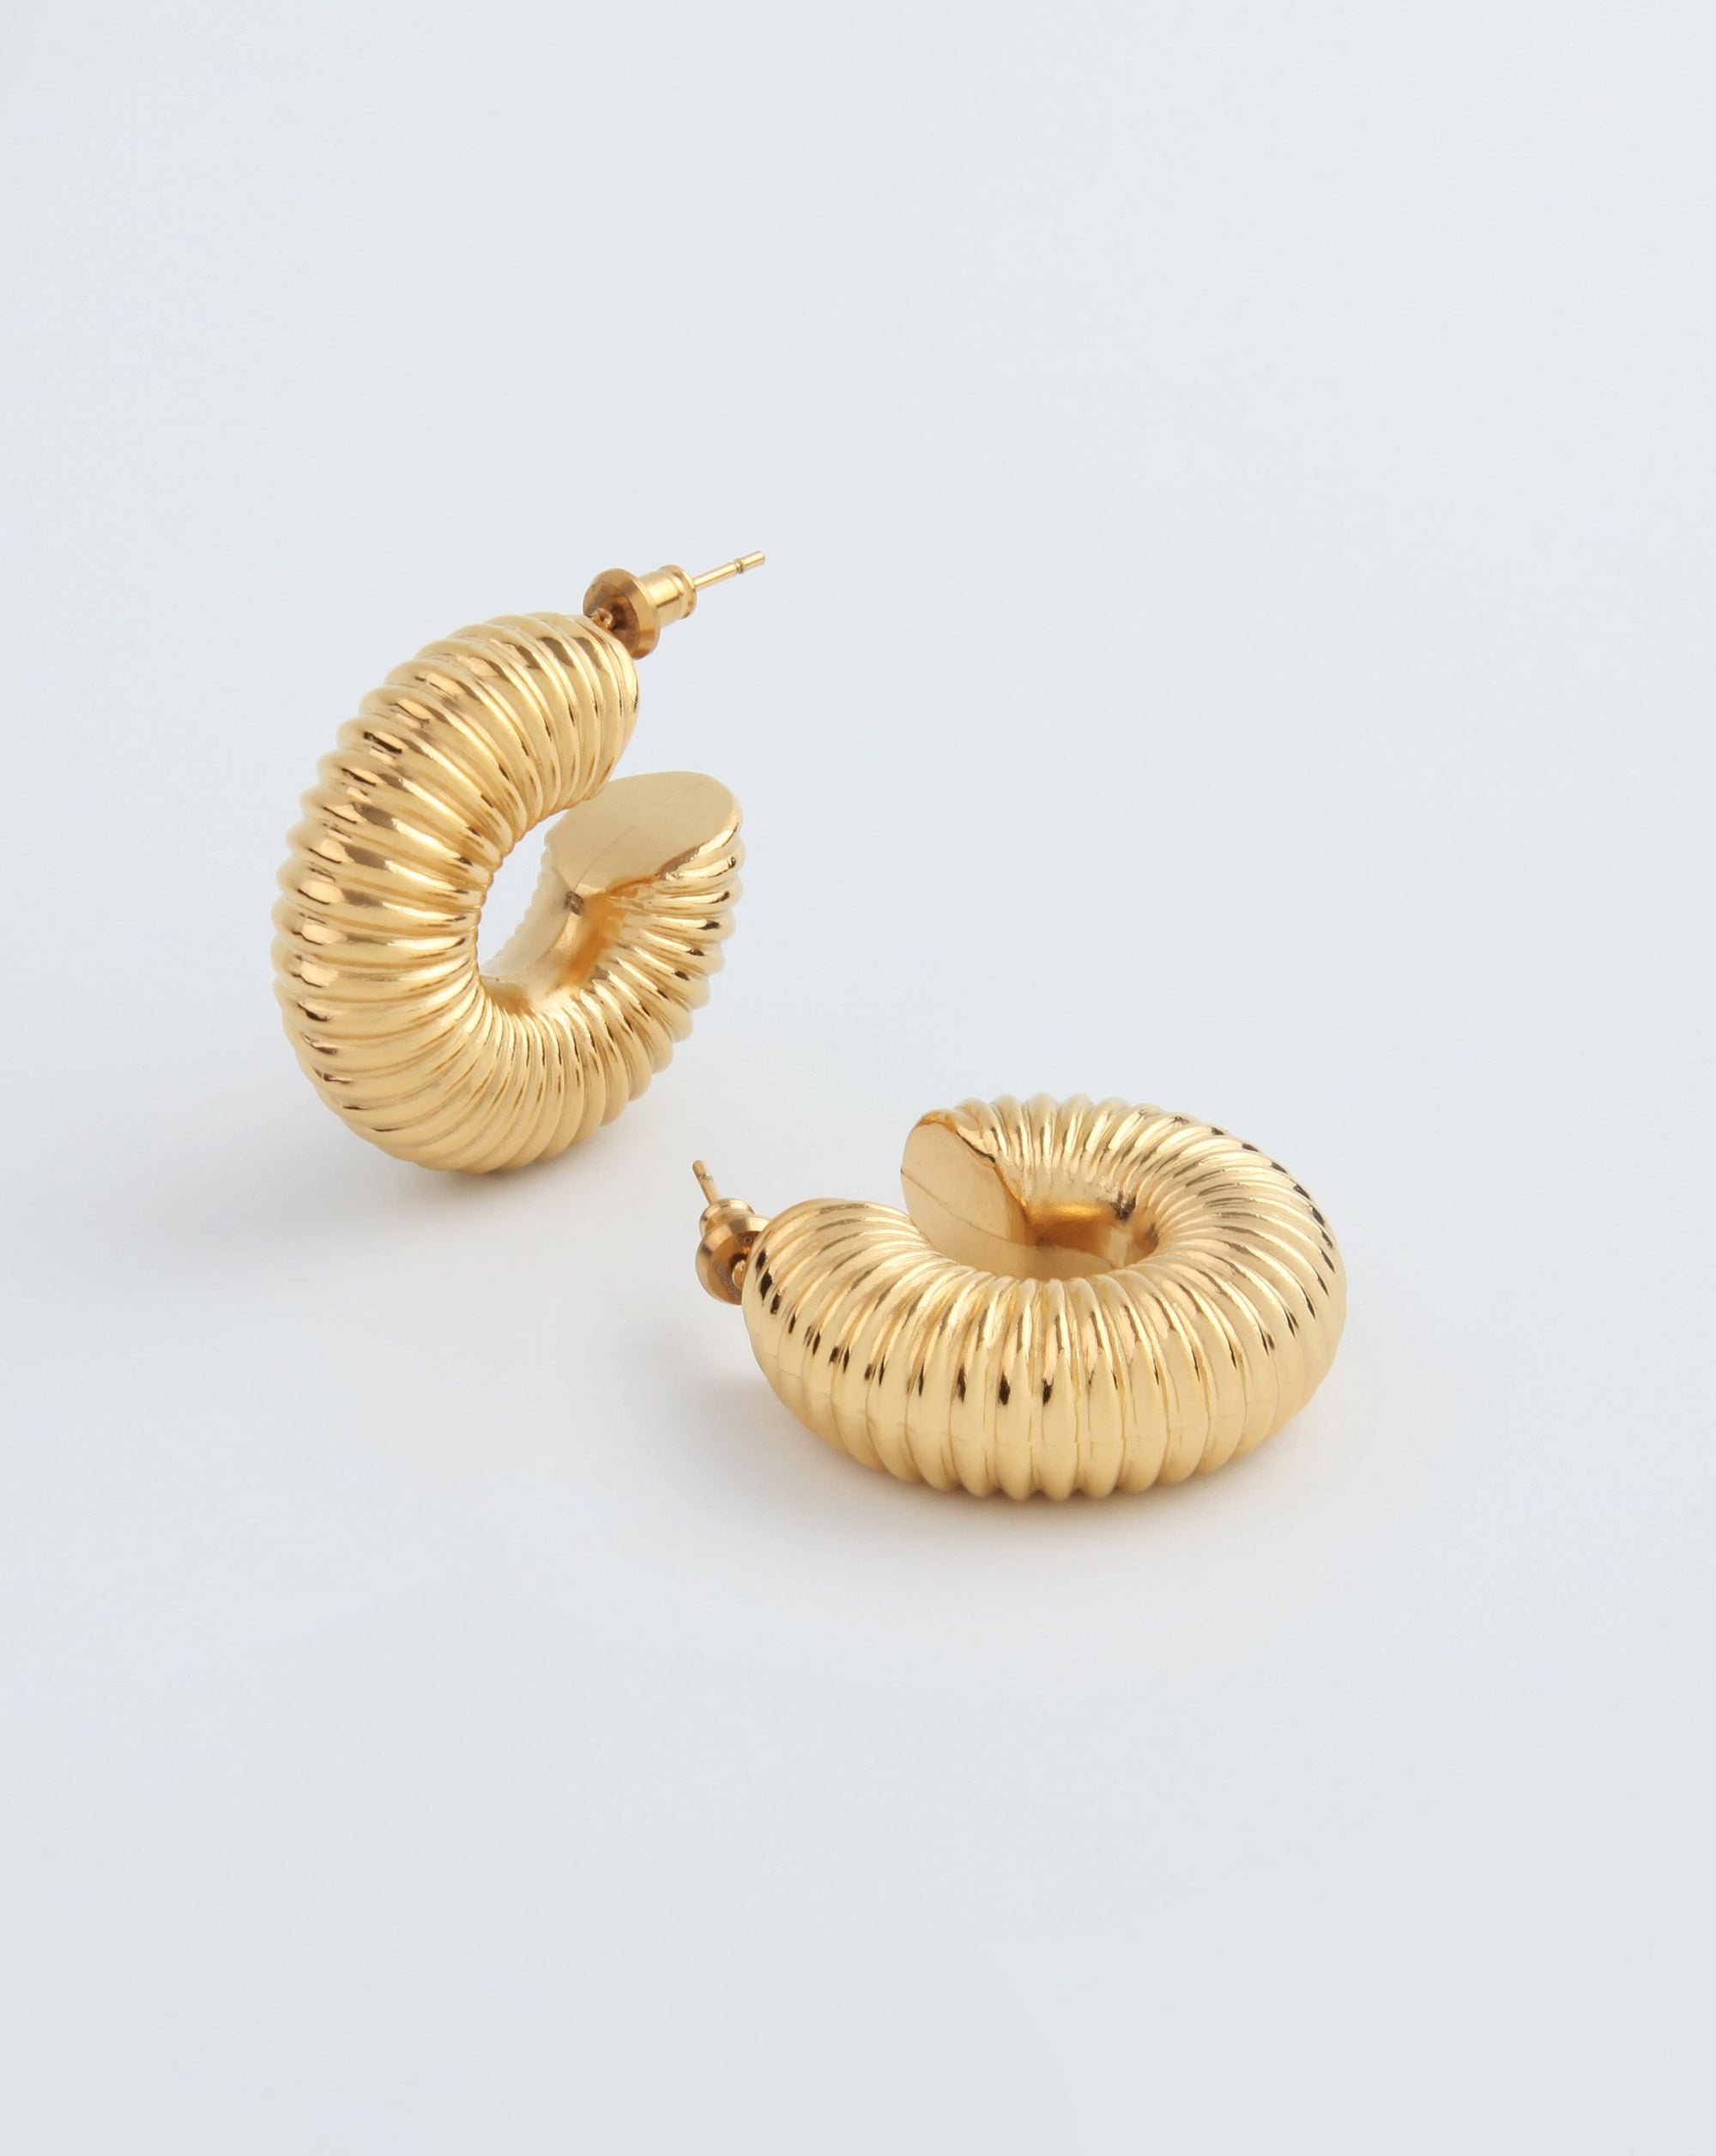 A pair of chunky tubular hoop earrings with a ribbed texture is displayed on a plain white background. One Dahlia Earrings Gold by For Art's Sake® stands upright, showcasing its circular shape, while the other lies on its side, emphasizing the intricate detailing.